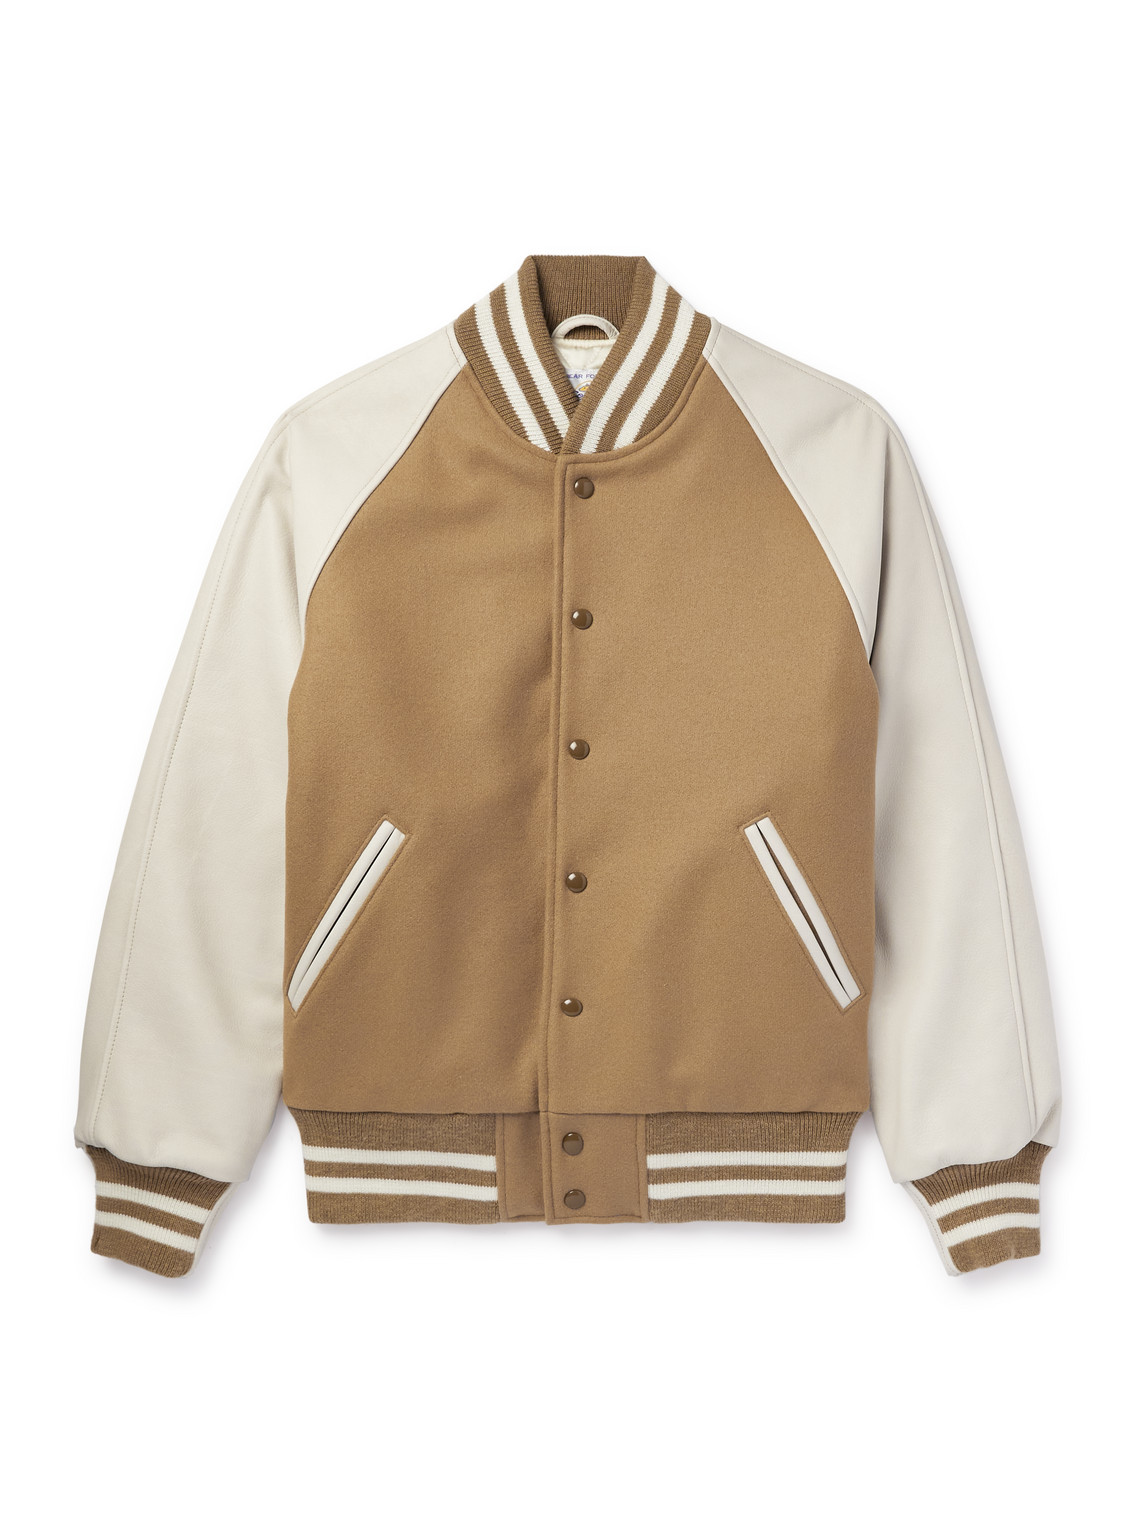 The Ralston Wool-Blend and Leather Bomber Jacket